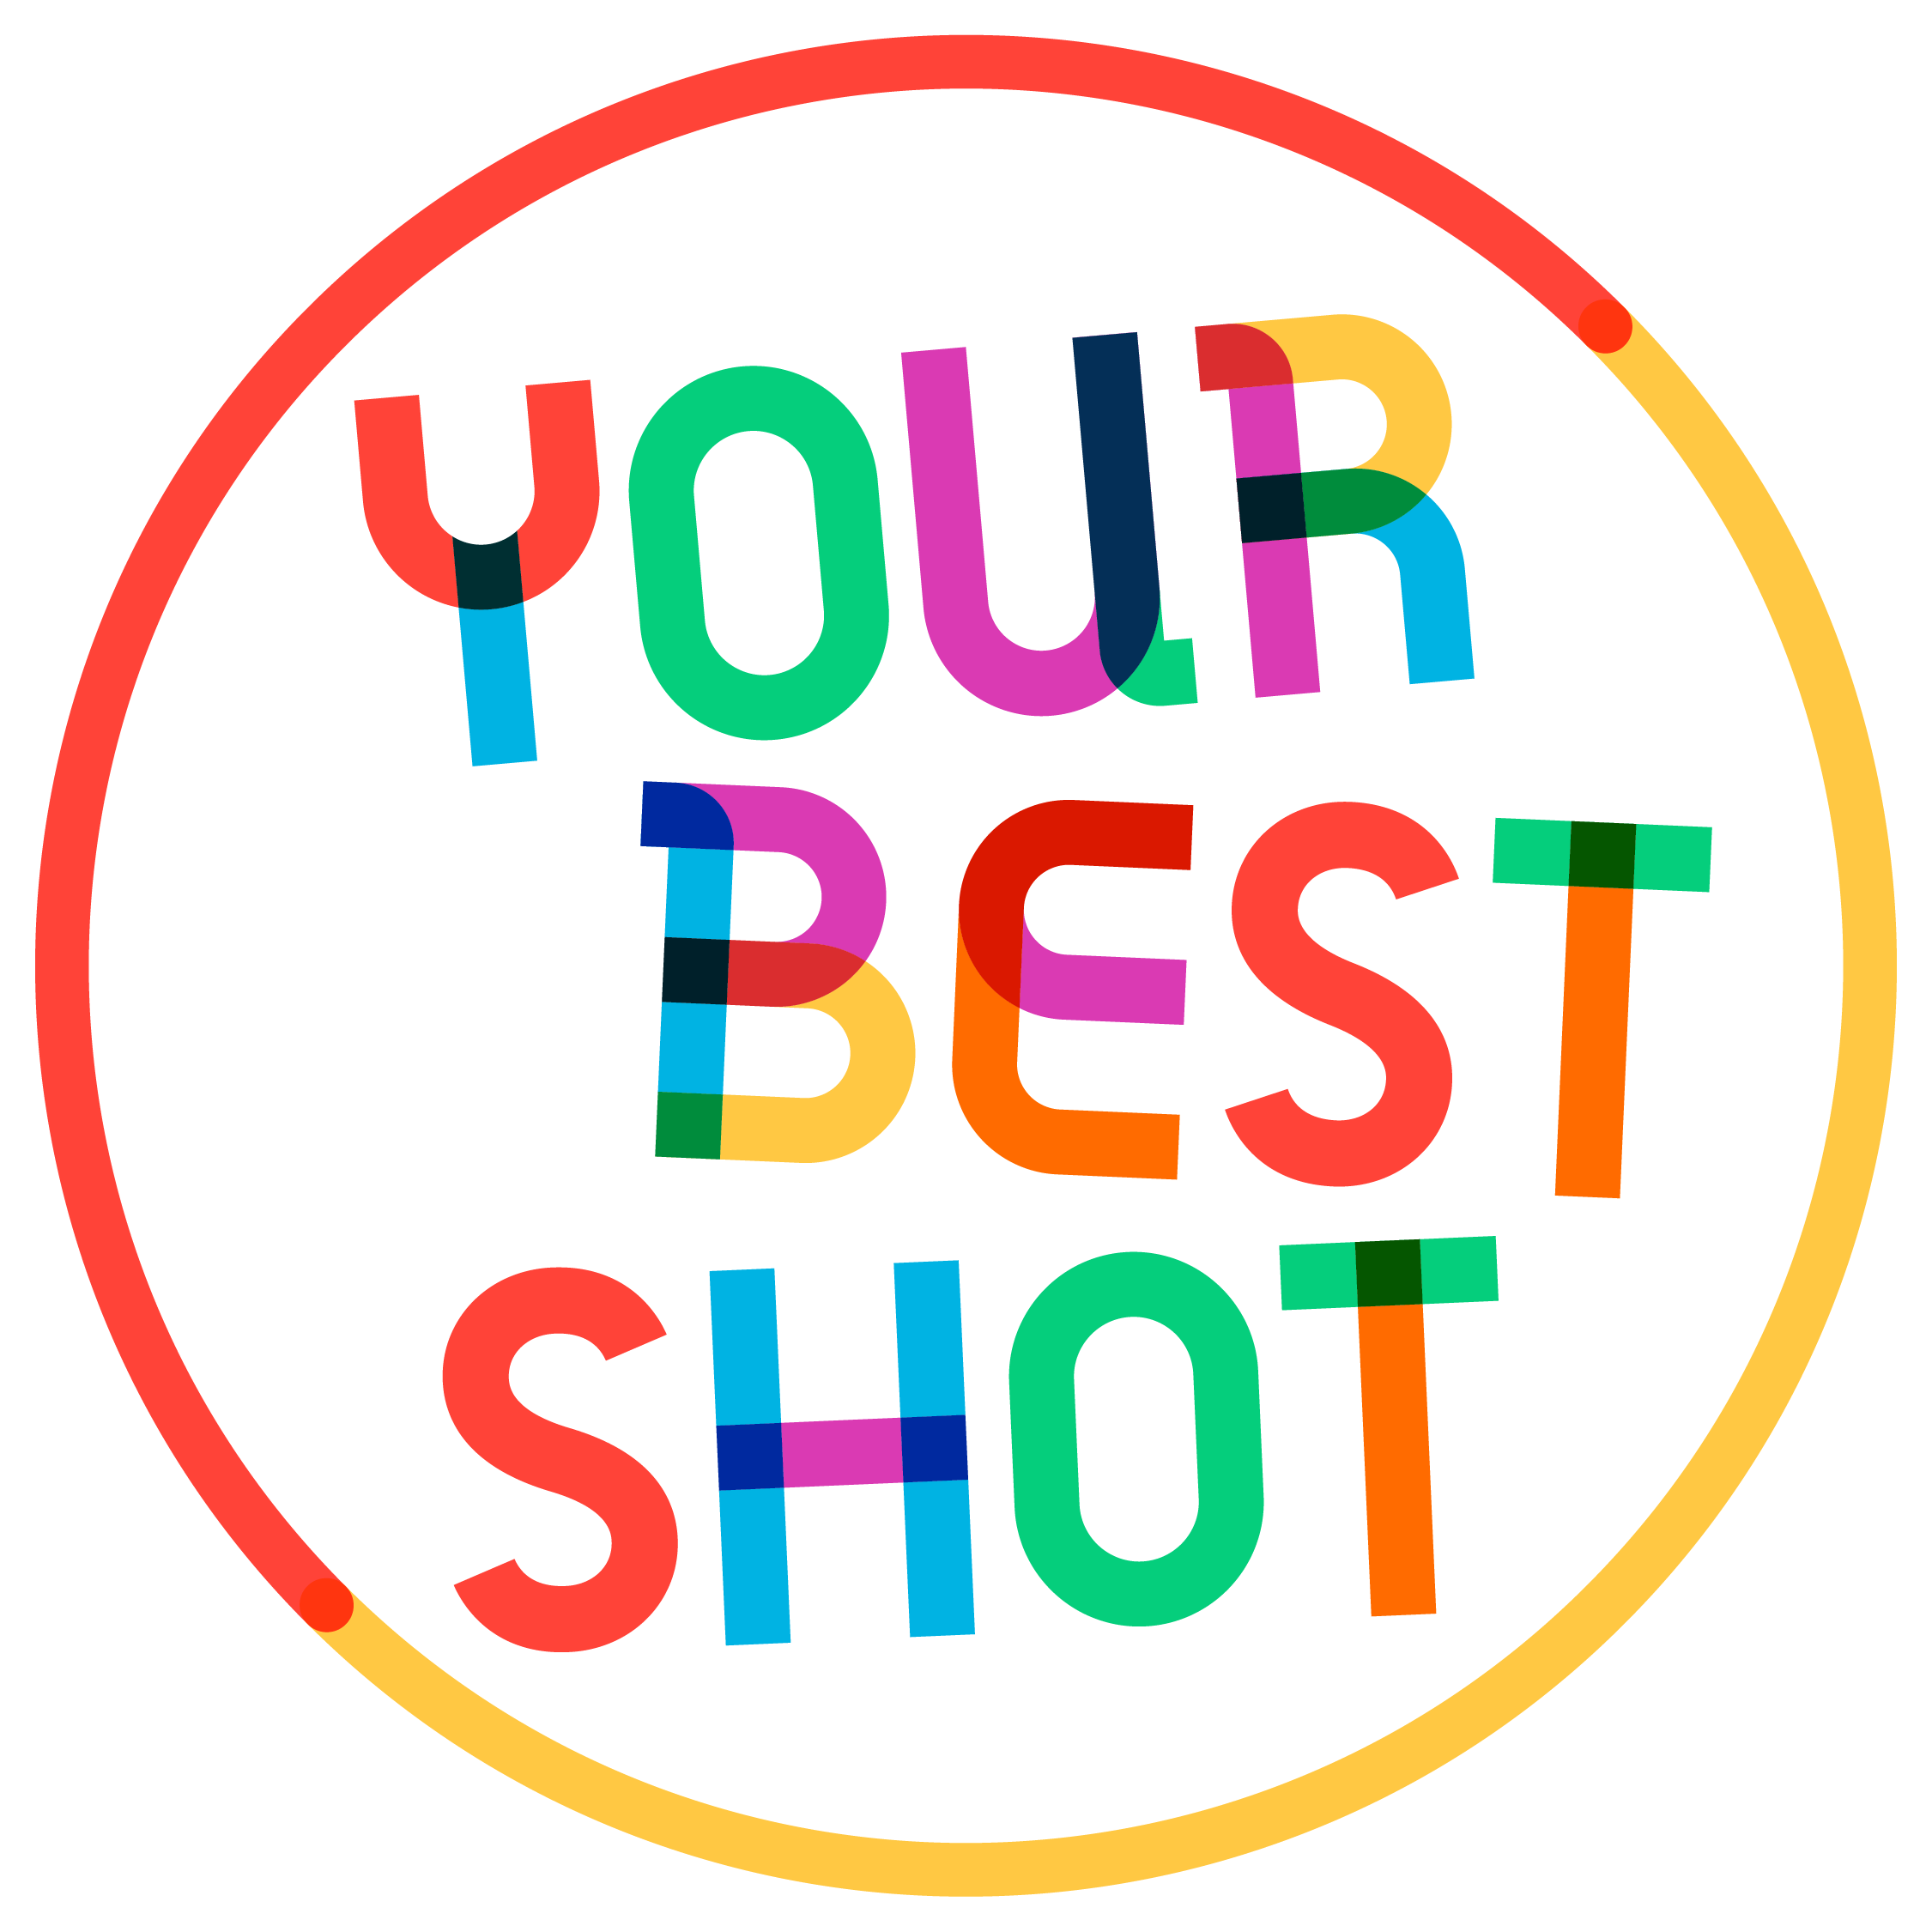 Multicolored icon featuring the text "Your Best Shot"